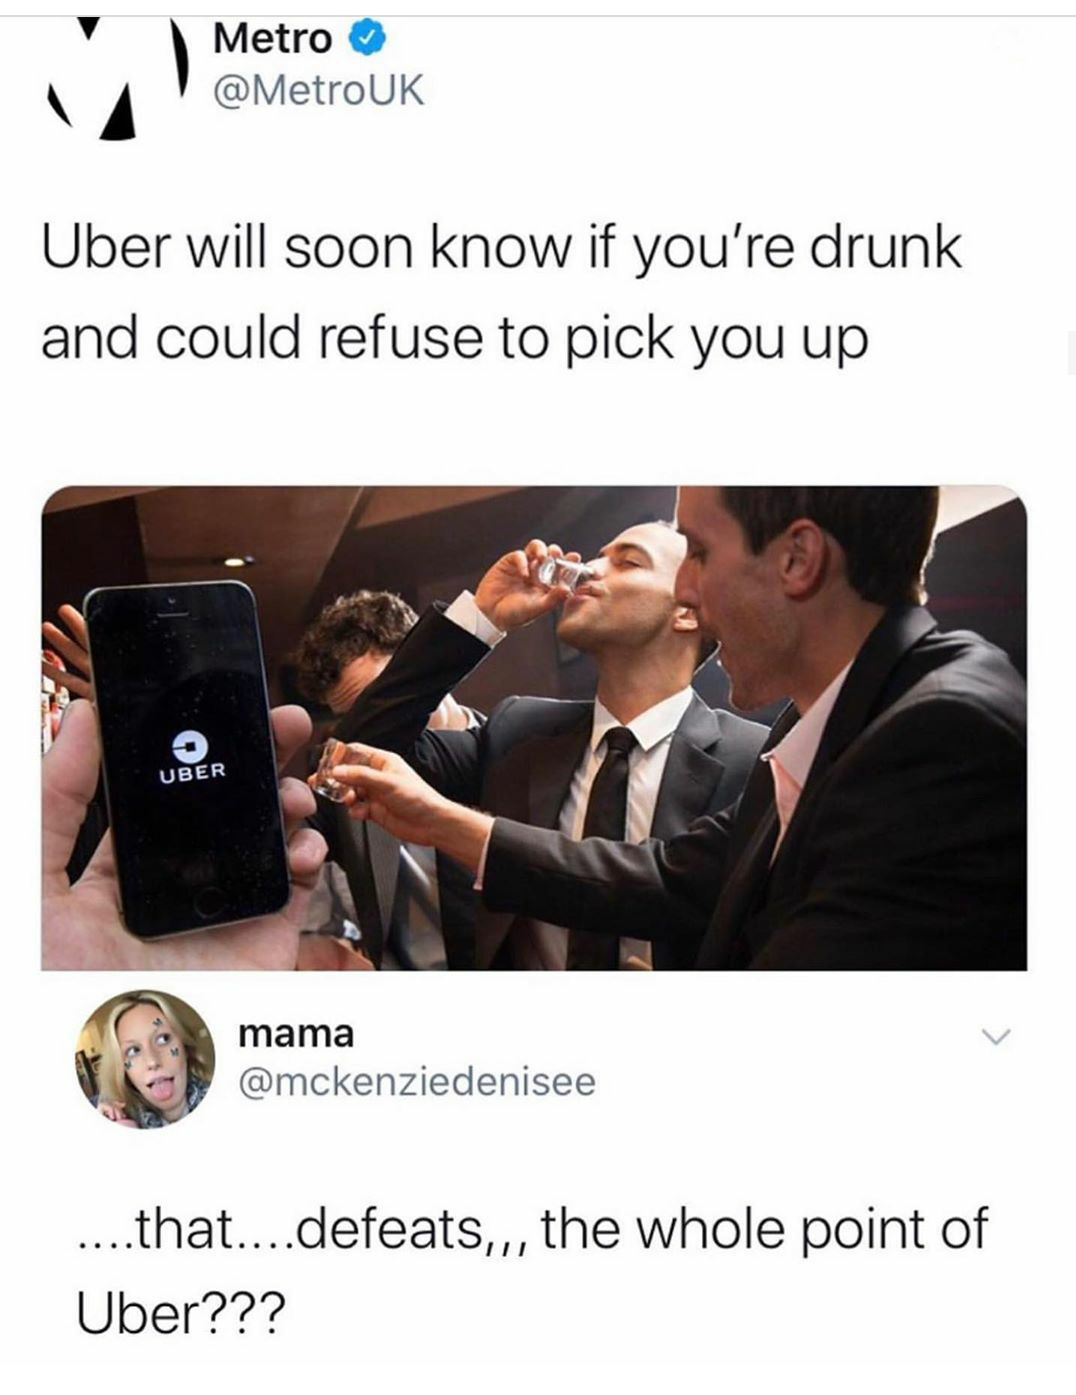 uber dank memes - Metro Uber will soon know if you're drunk and could refuse to pick you up Uber mama ....that....defeats,,, the whole point of Uber???